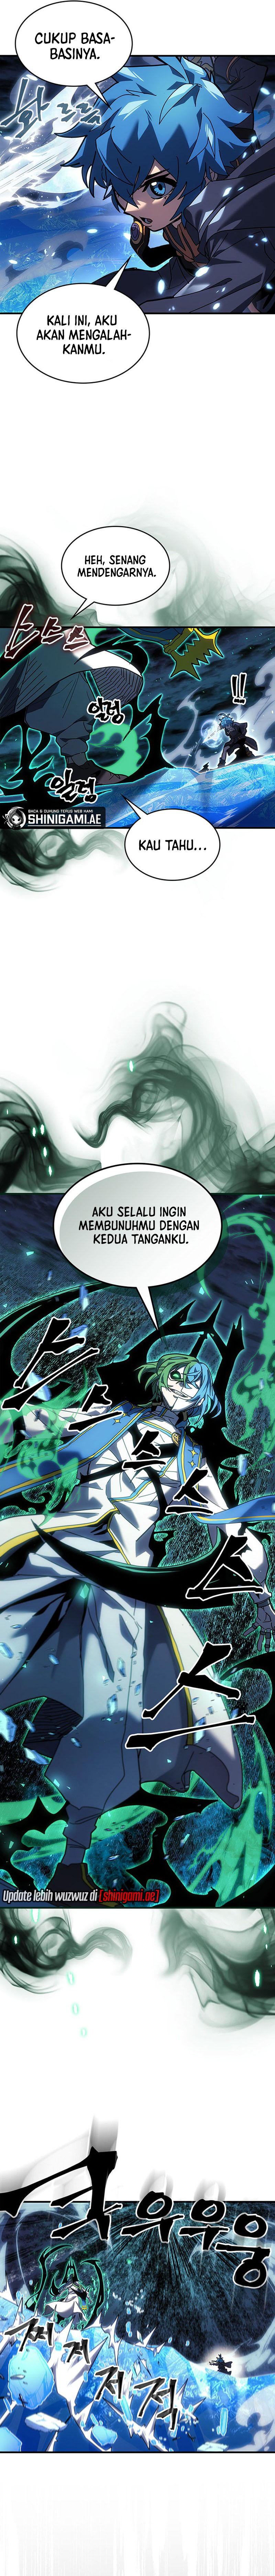 a-returners-magic-should-be-special-indo Chapter 240